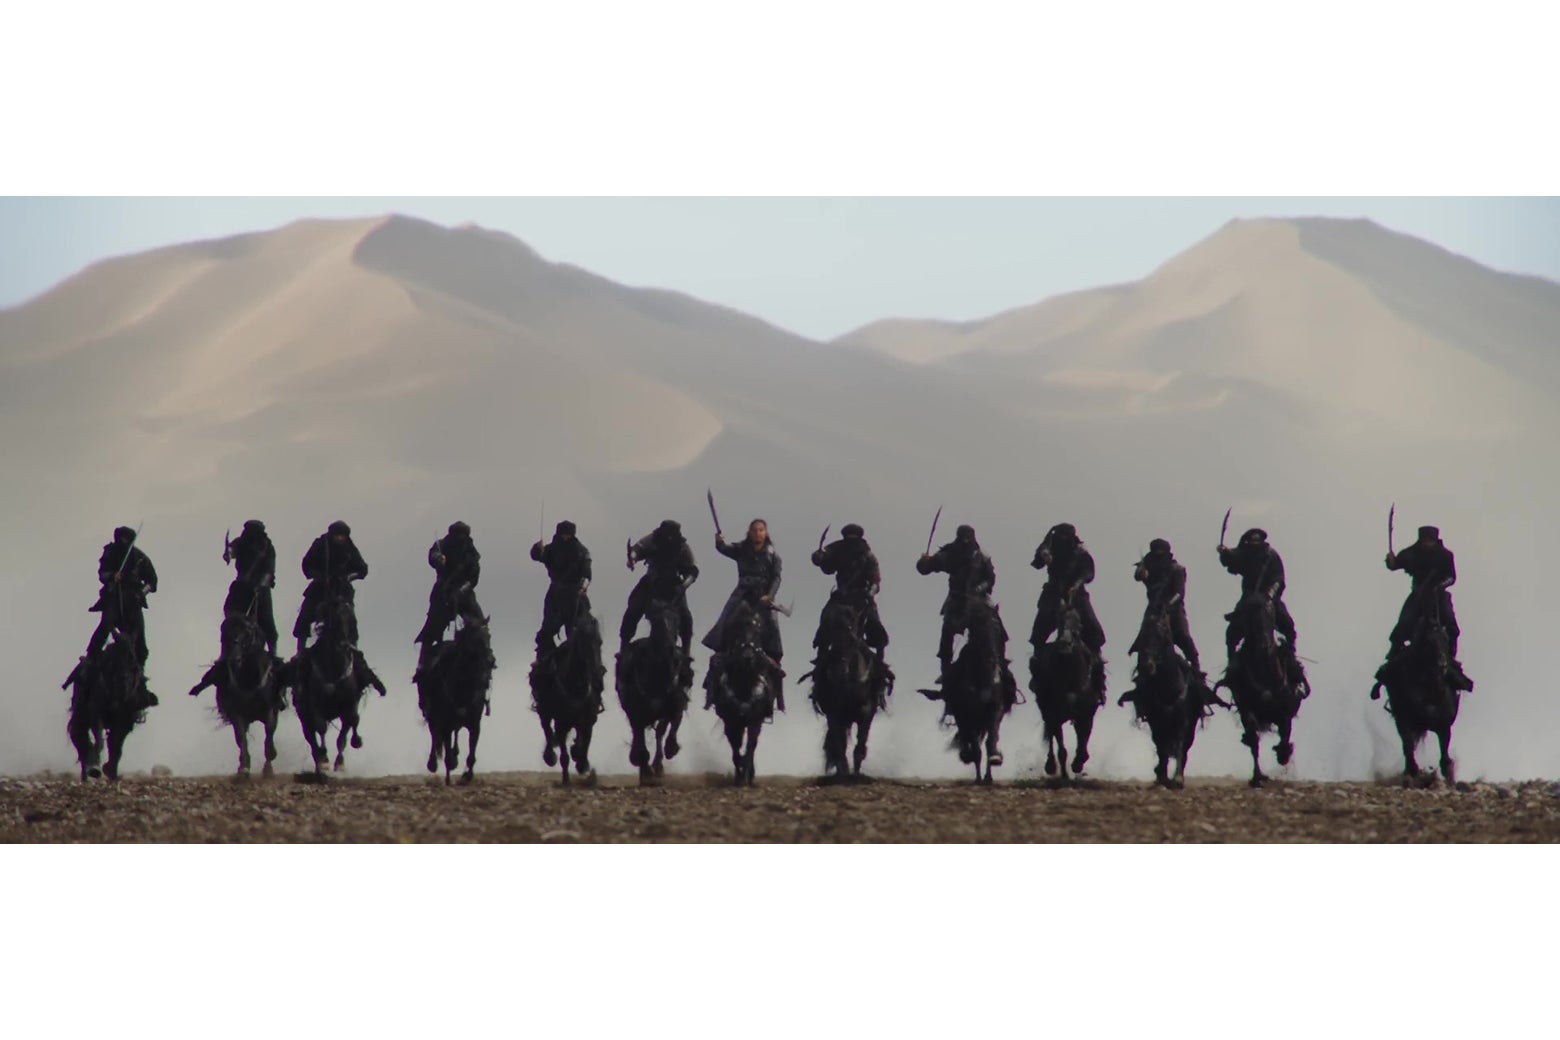 13 soldiers on horseback, riding in a row straight at the camera, in a still from Mulan.